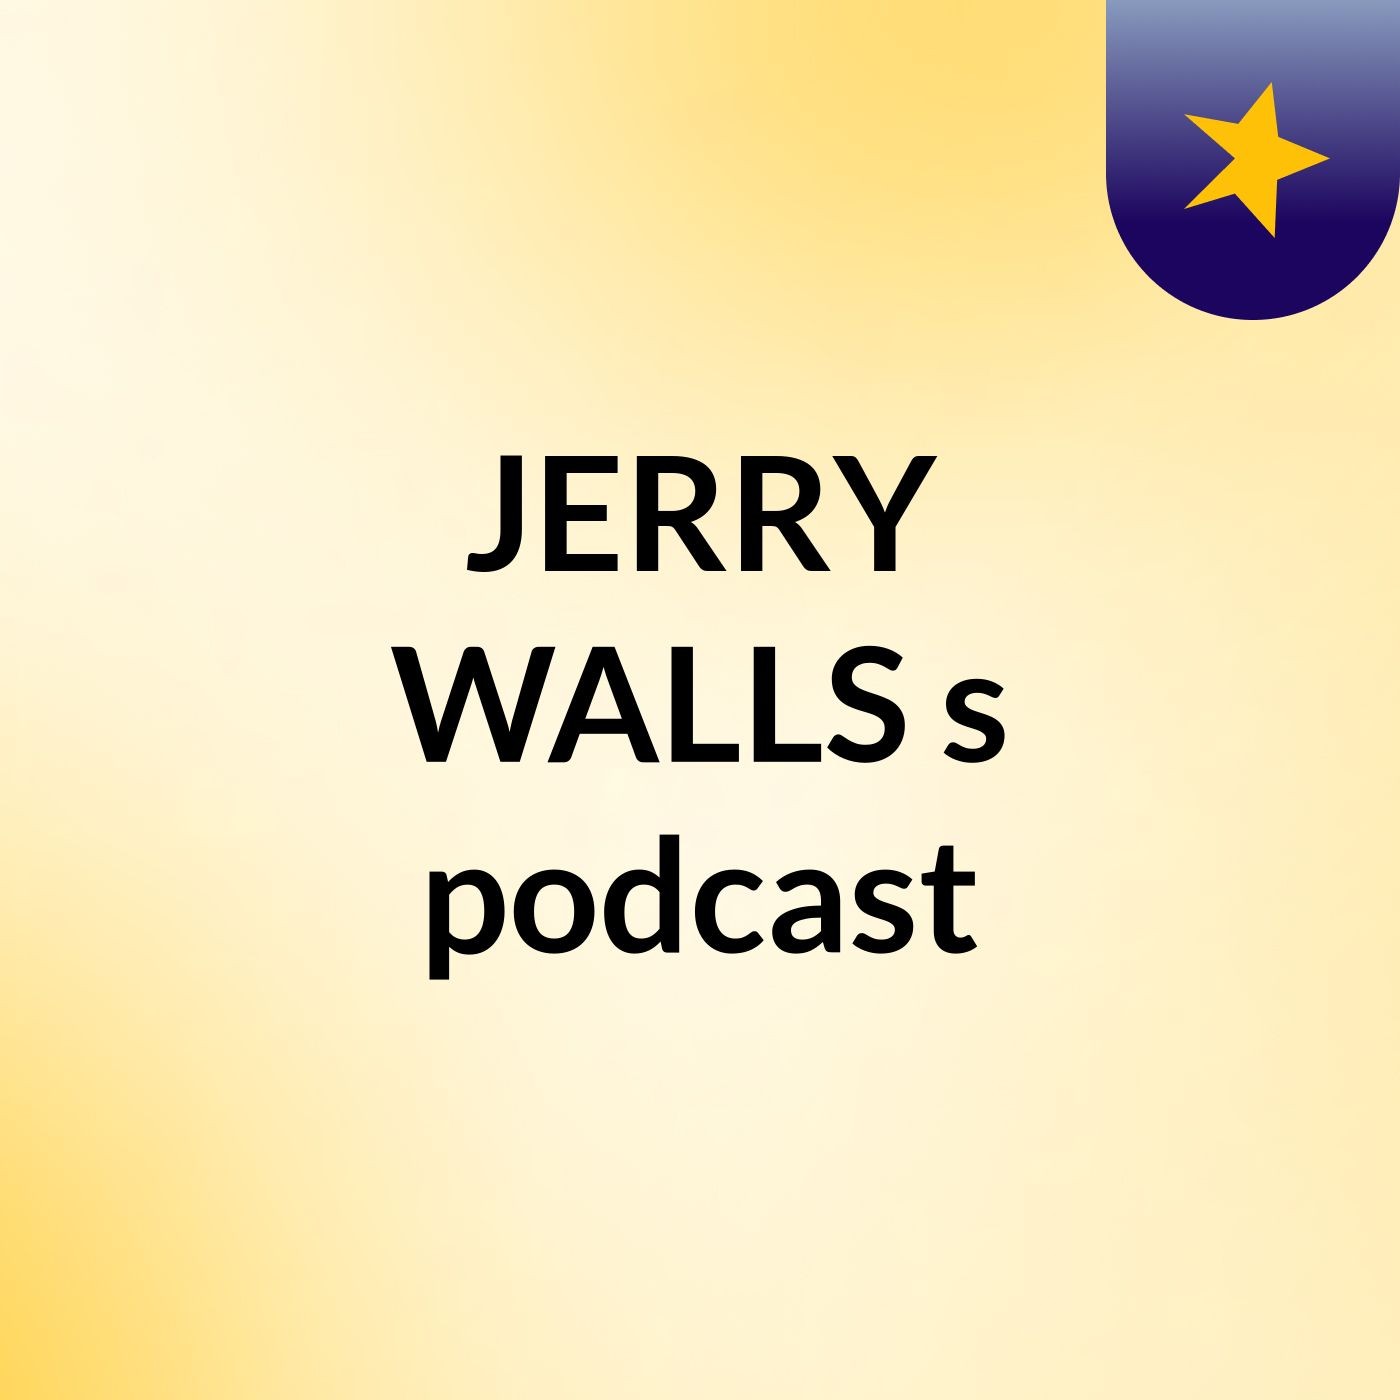 JERRY WALLS's podcast